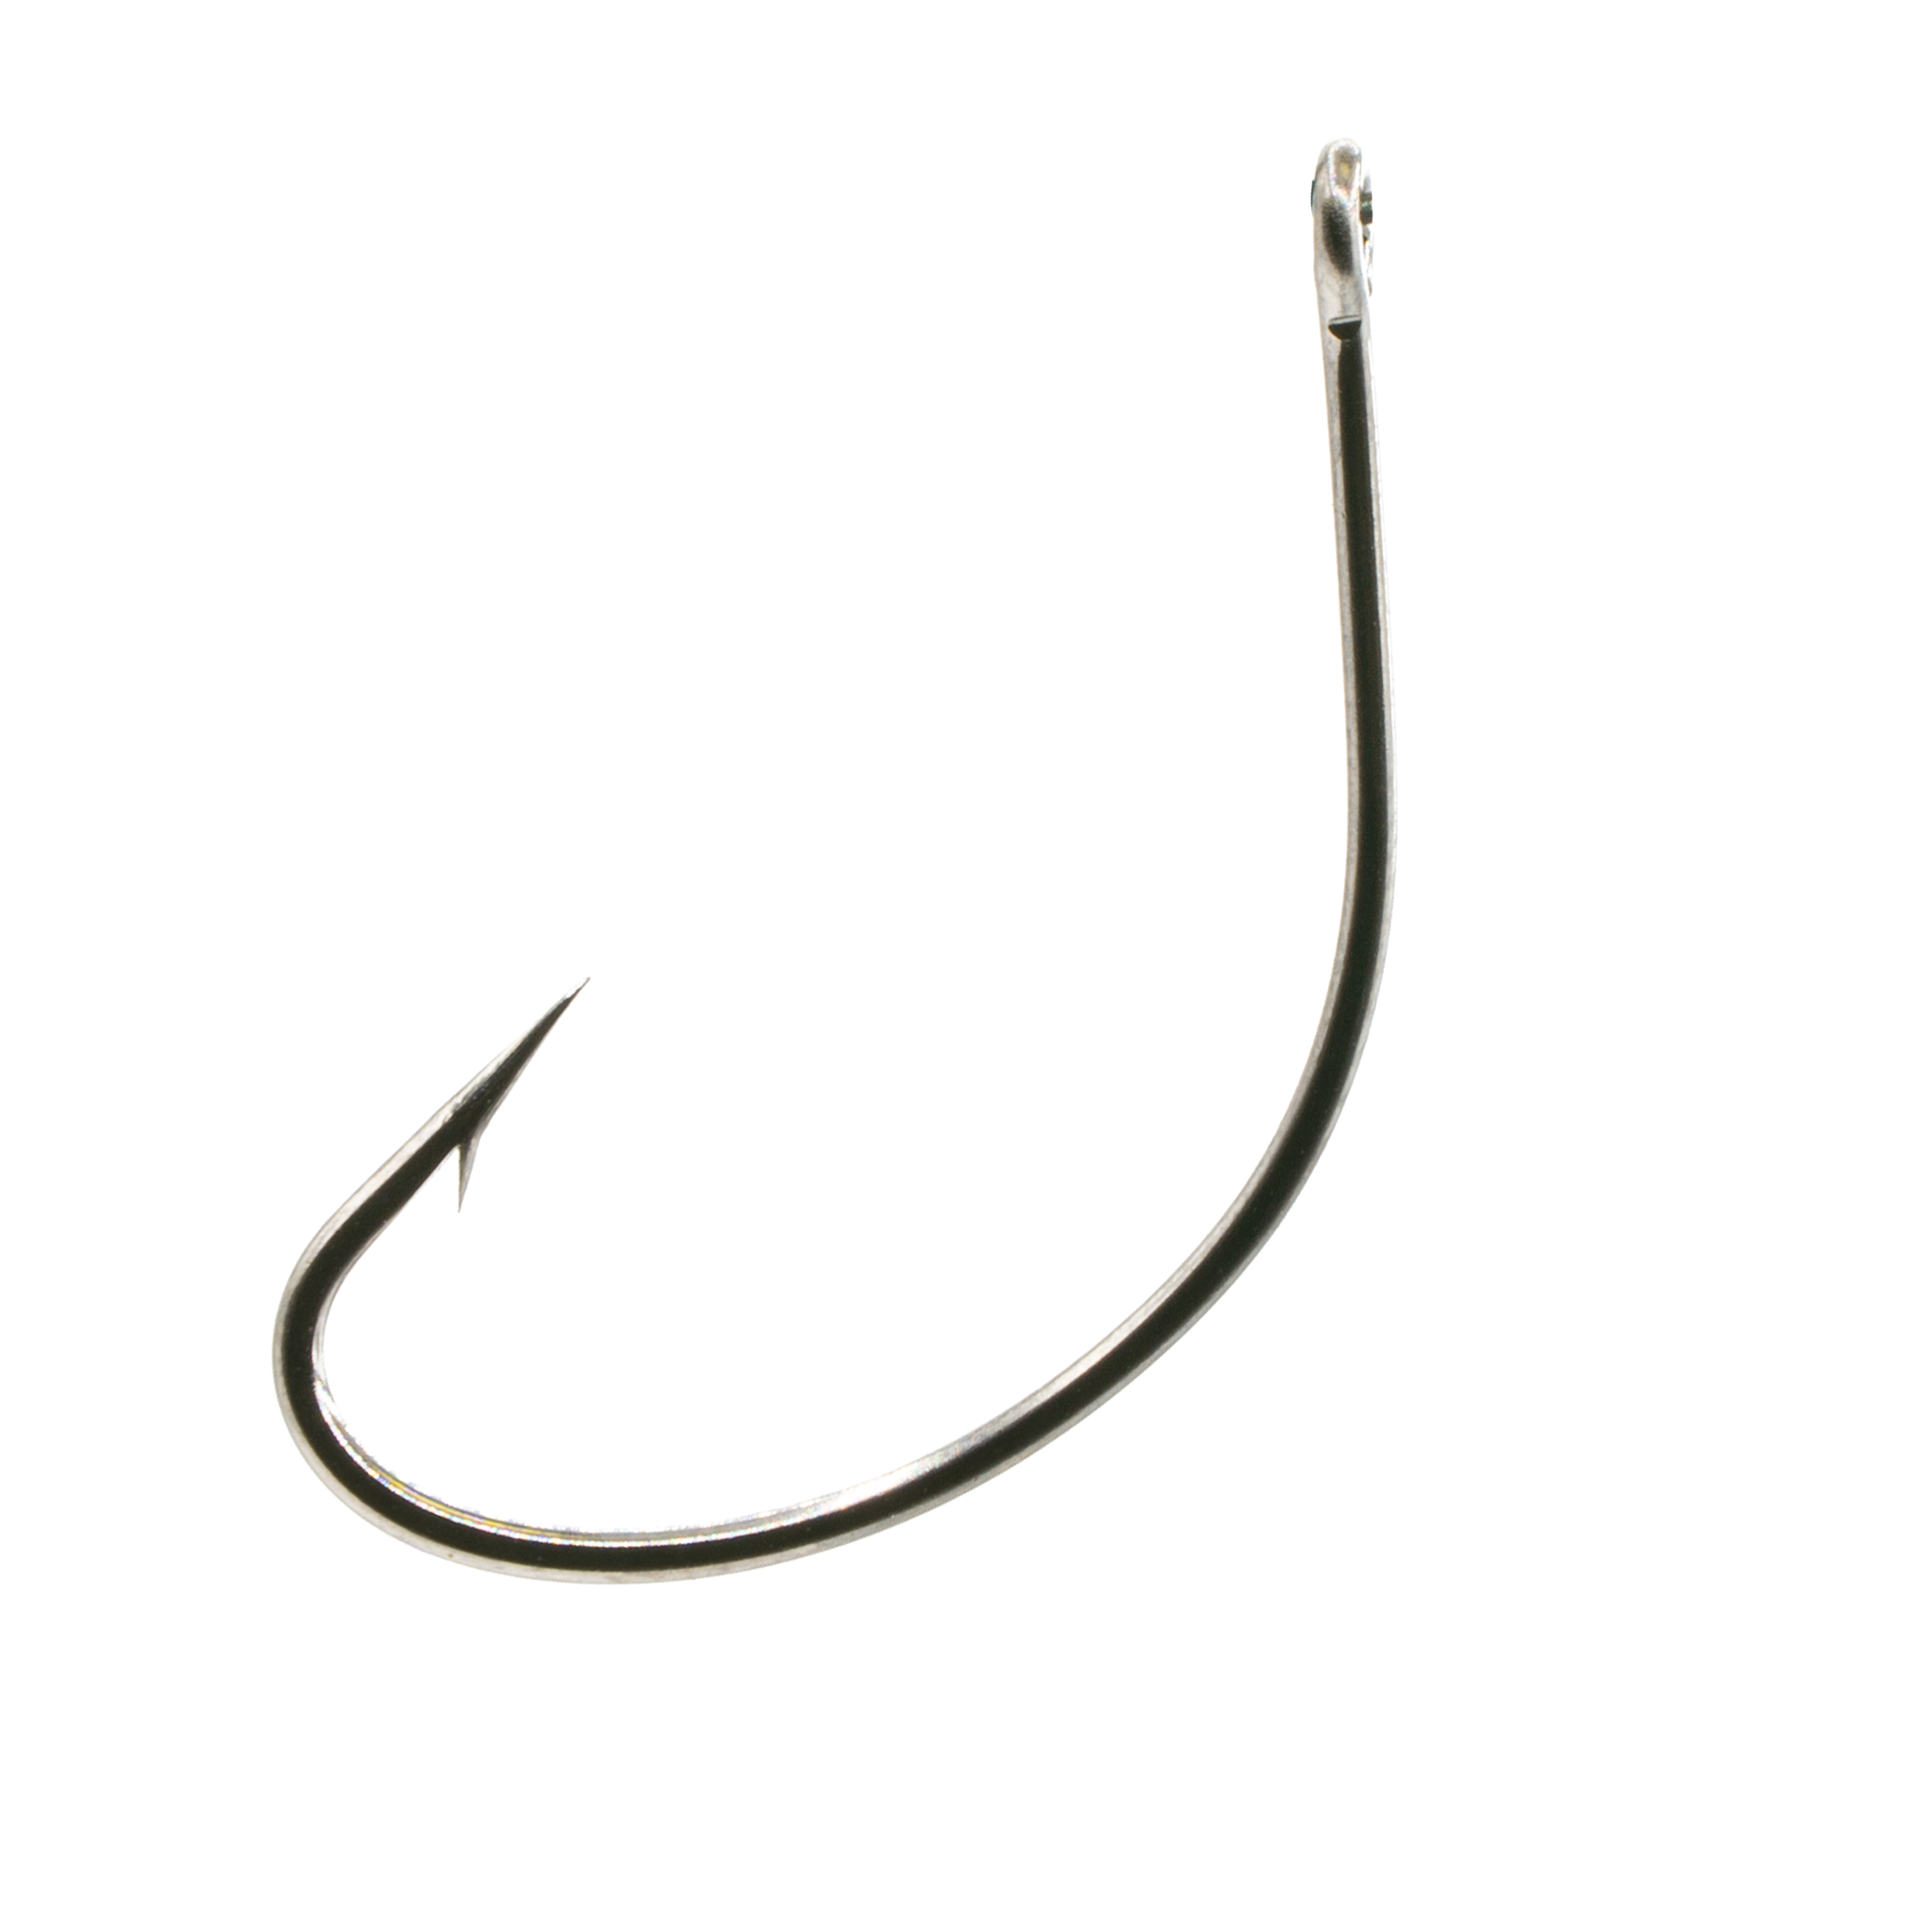 Inline Circle Hook (100 Pack) Saltwater Freshwater Offshore Inshore Fishing  Live Bait #1, 2, 1/0, 2/0, 3/0, 4/0, 5/0 Hook Sizes